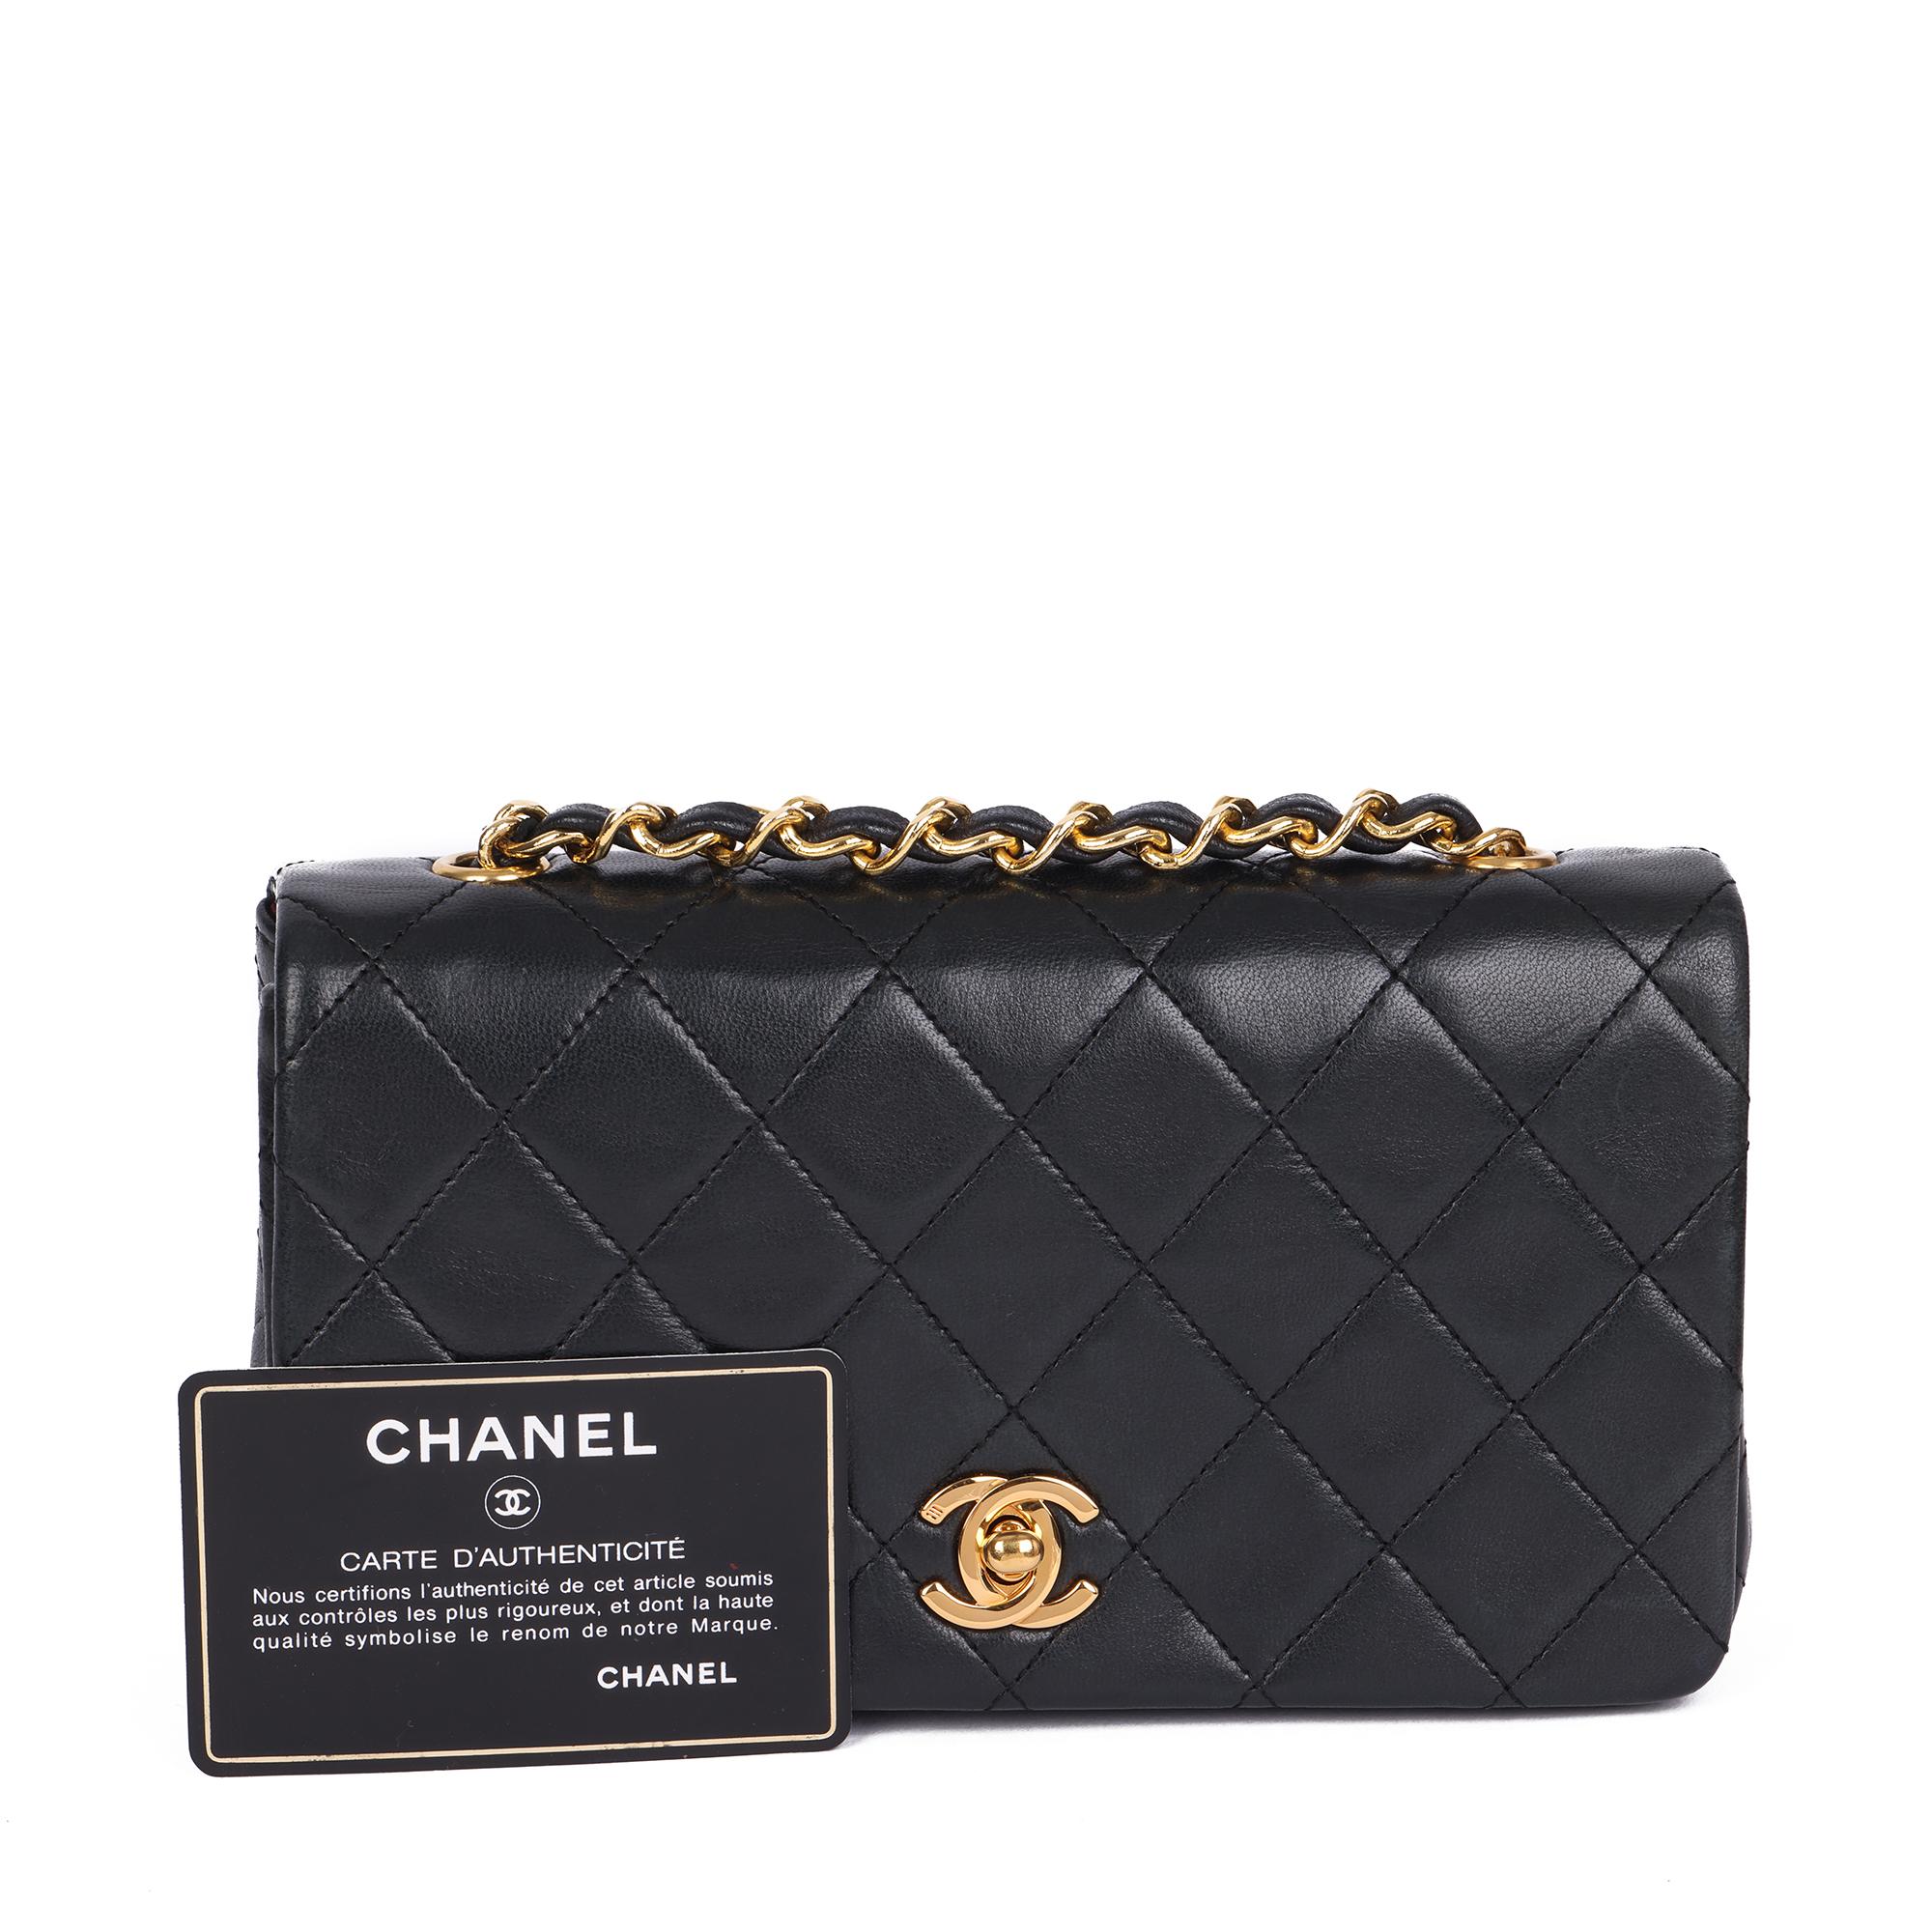 1991 Chanel Black Quilted Lambskin Vintage Mini Full Flap Bag 9